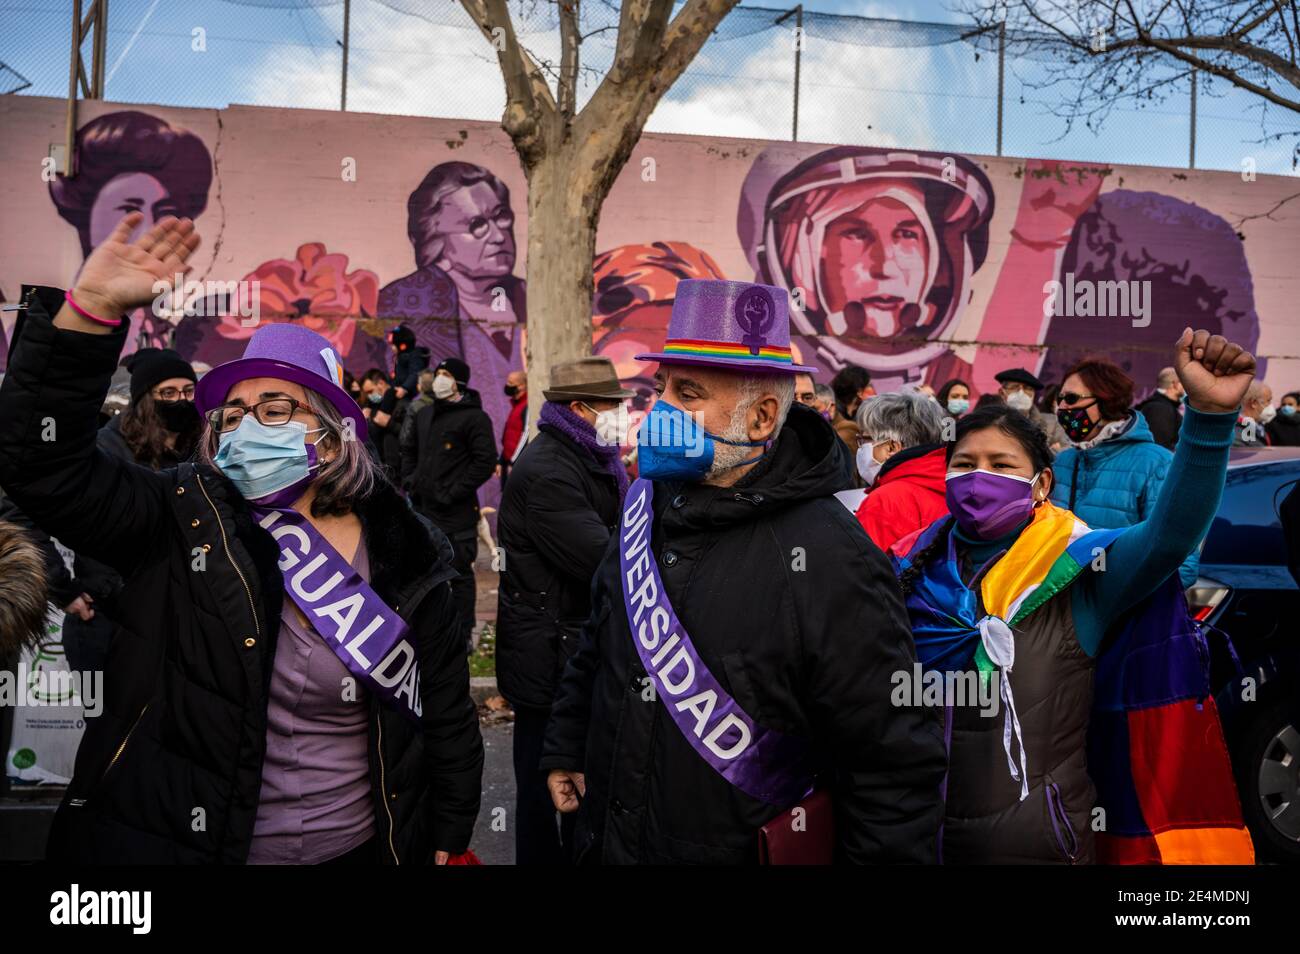 Madrid, Spain. 24th Jan, 2021. Protesters raise hands next to a feminist mural named 'Union makes force', during a protest against the removal of the mural proposed by far-right party VOX. In the mural appear the faces of 15 women who are part of history for their fight in favor of equality: Angela Davis, Frida Kahlo, Nina Simone, Rigoberta Menchu, Lucia Sanchez Saornil, Rosa Arauzo, Valentina Tereshkova, Chimamanda Ngozi, Emma Goldman, Kanno Sugato, Liudmila Pavlichenko, Billy Jean King, Gata Cattana, Rosa Parks, and Comandanta Ramona. Credit: Marcos del Mazo/Alamy Live News Stock Photo